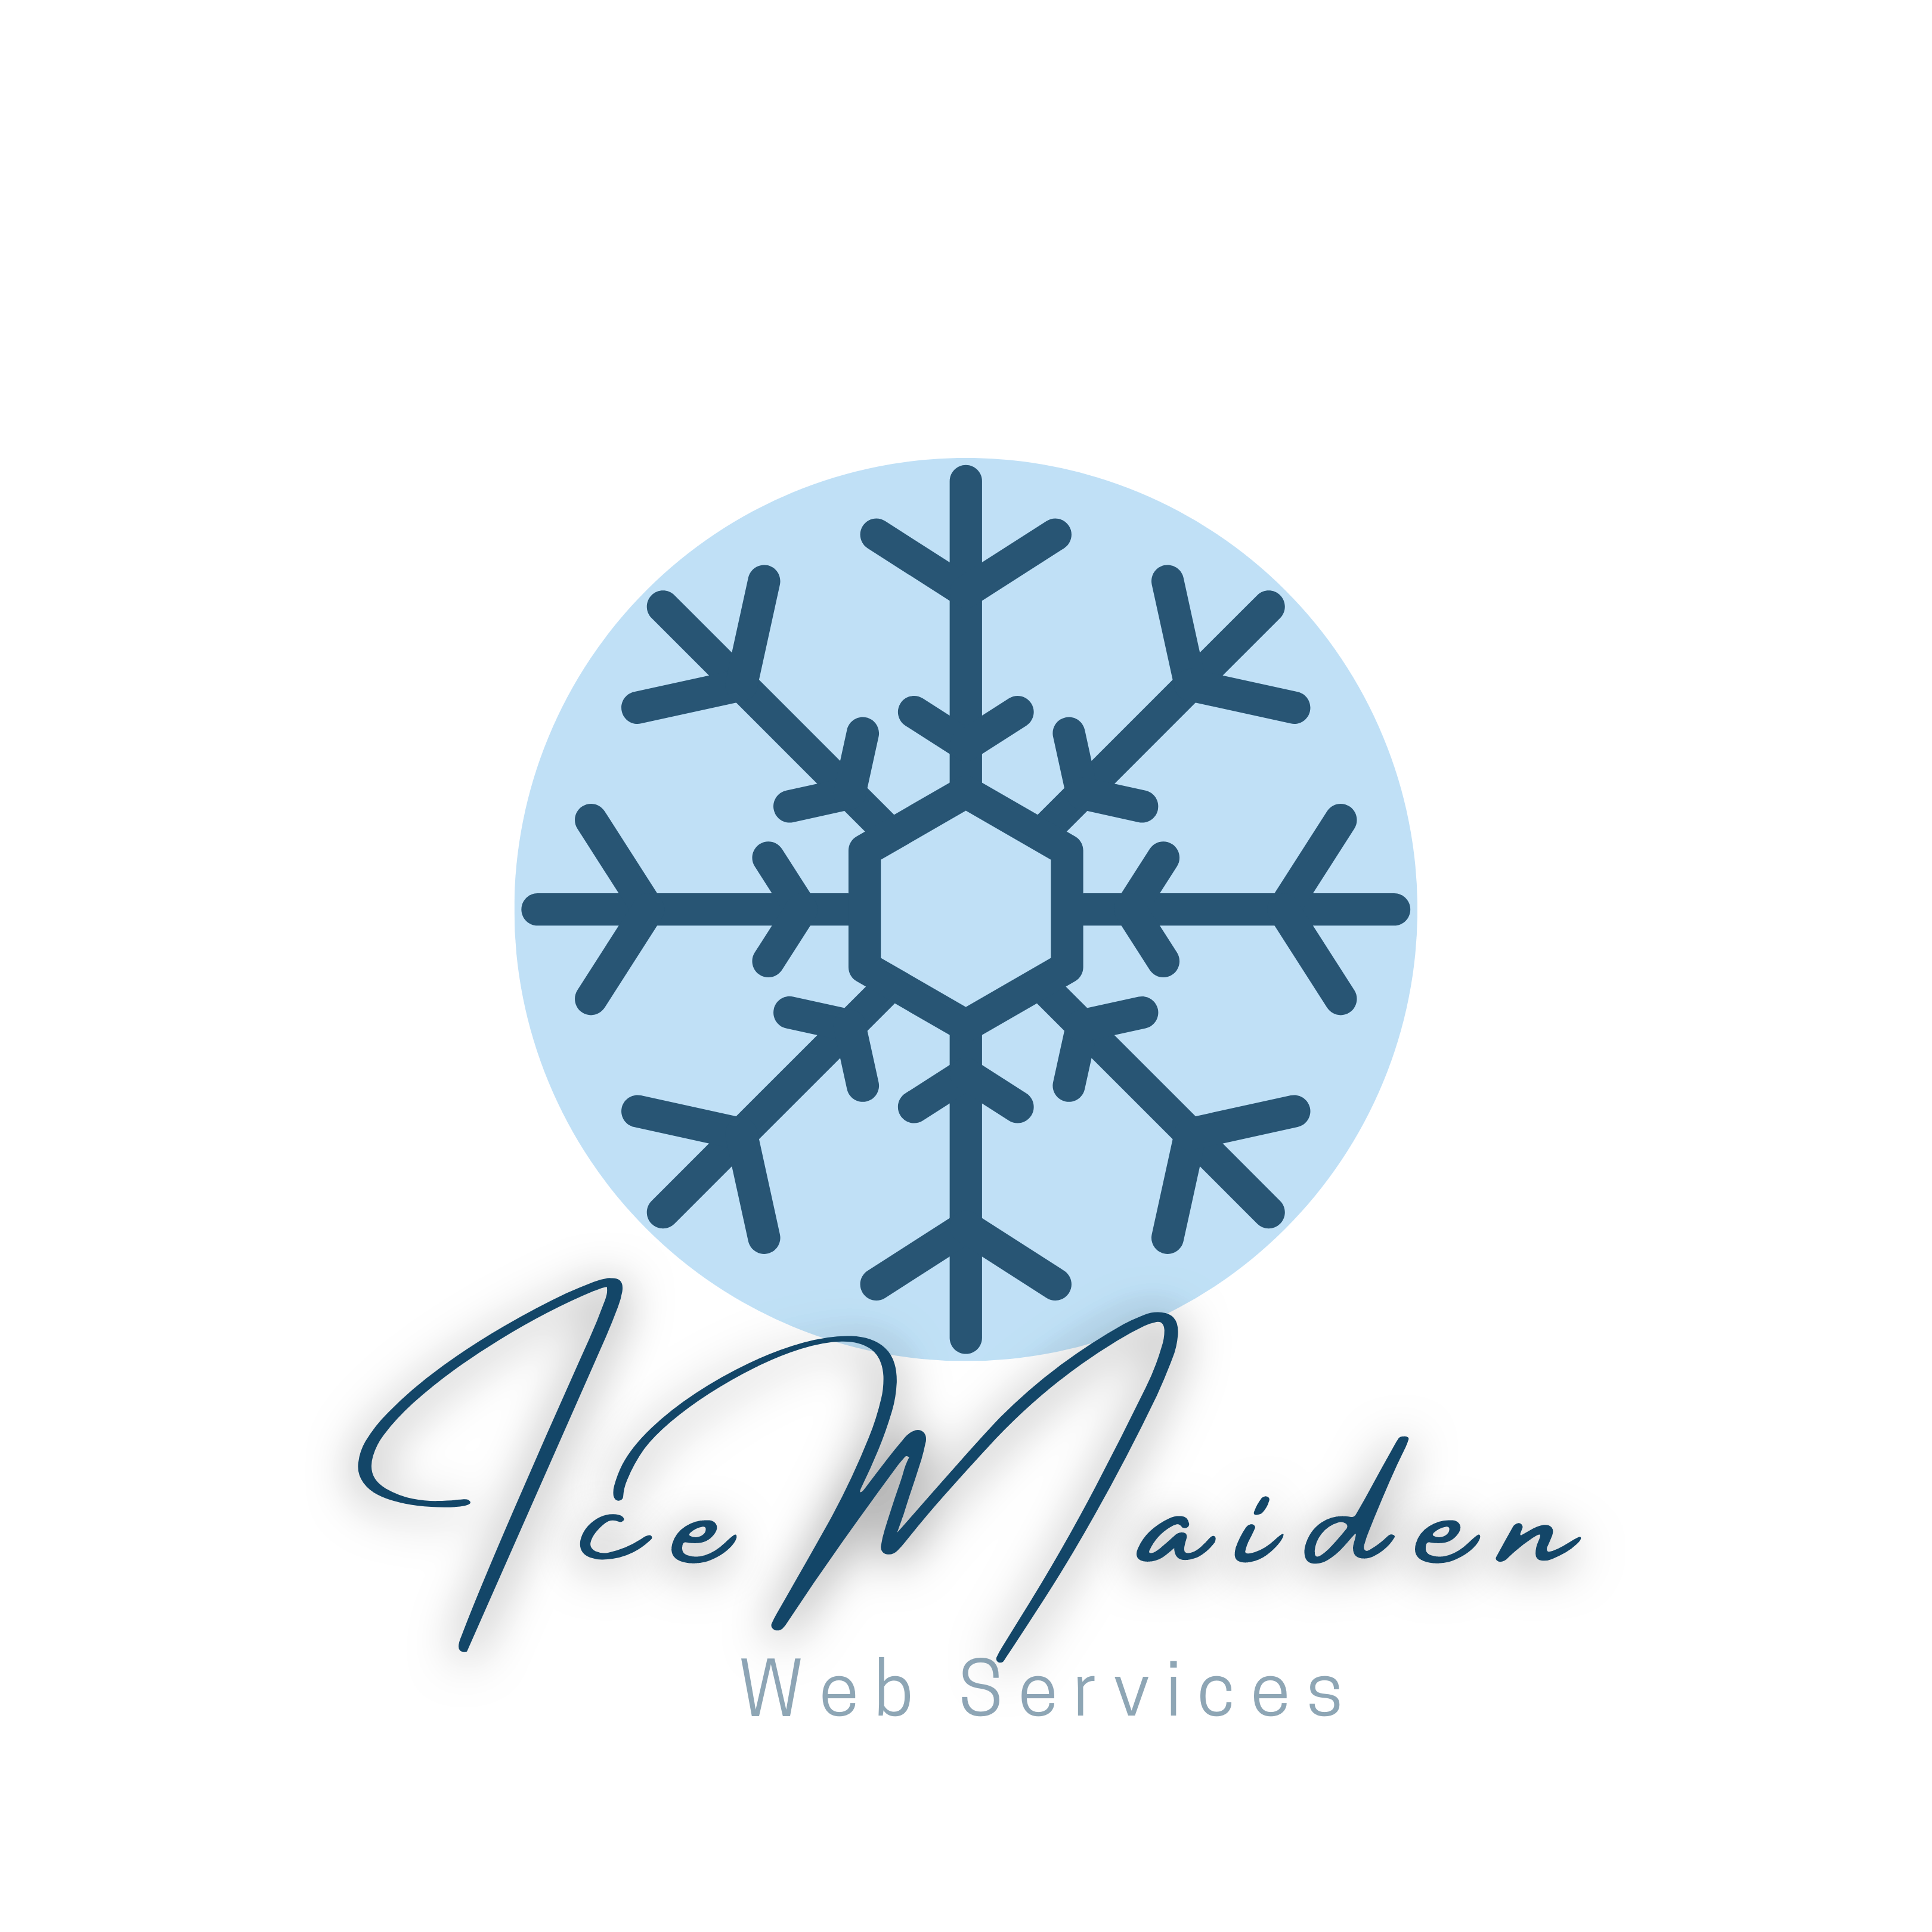 IceMaiden Web Services